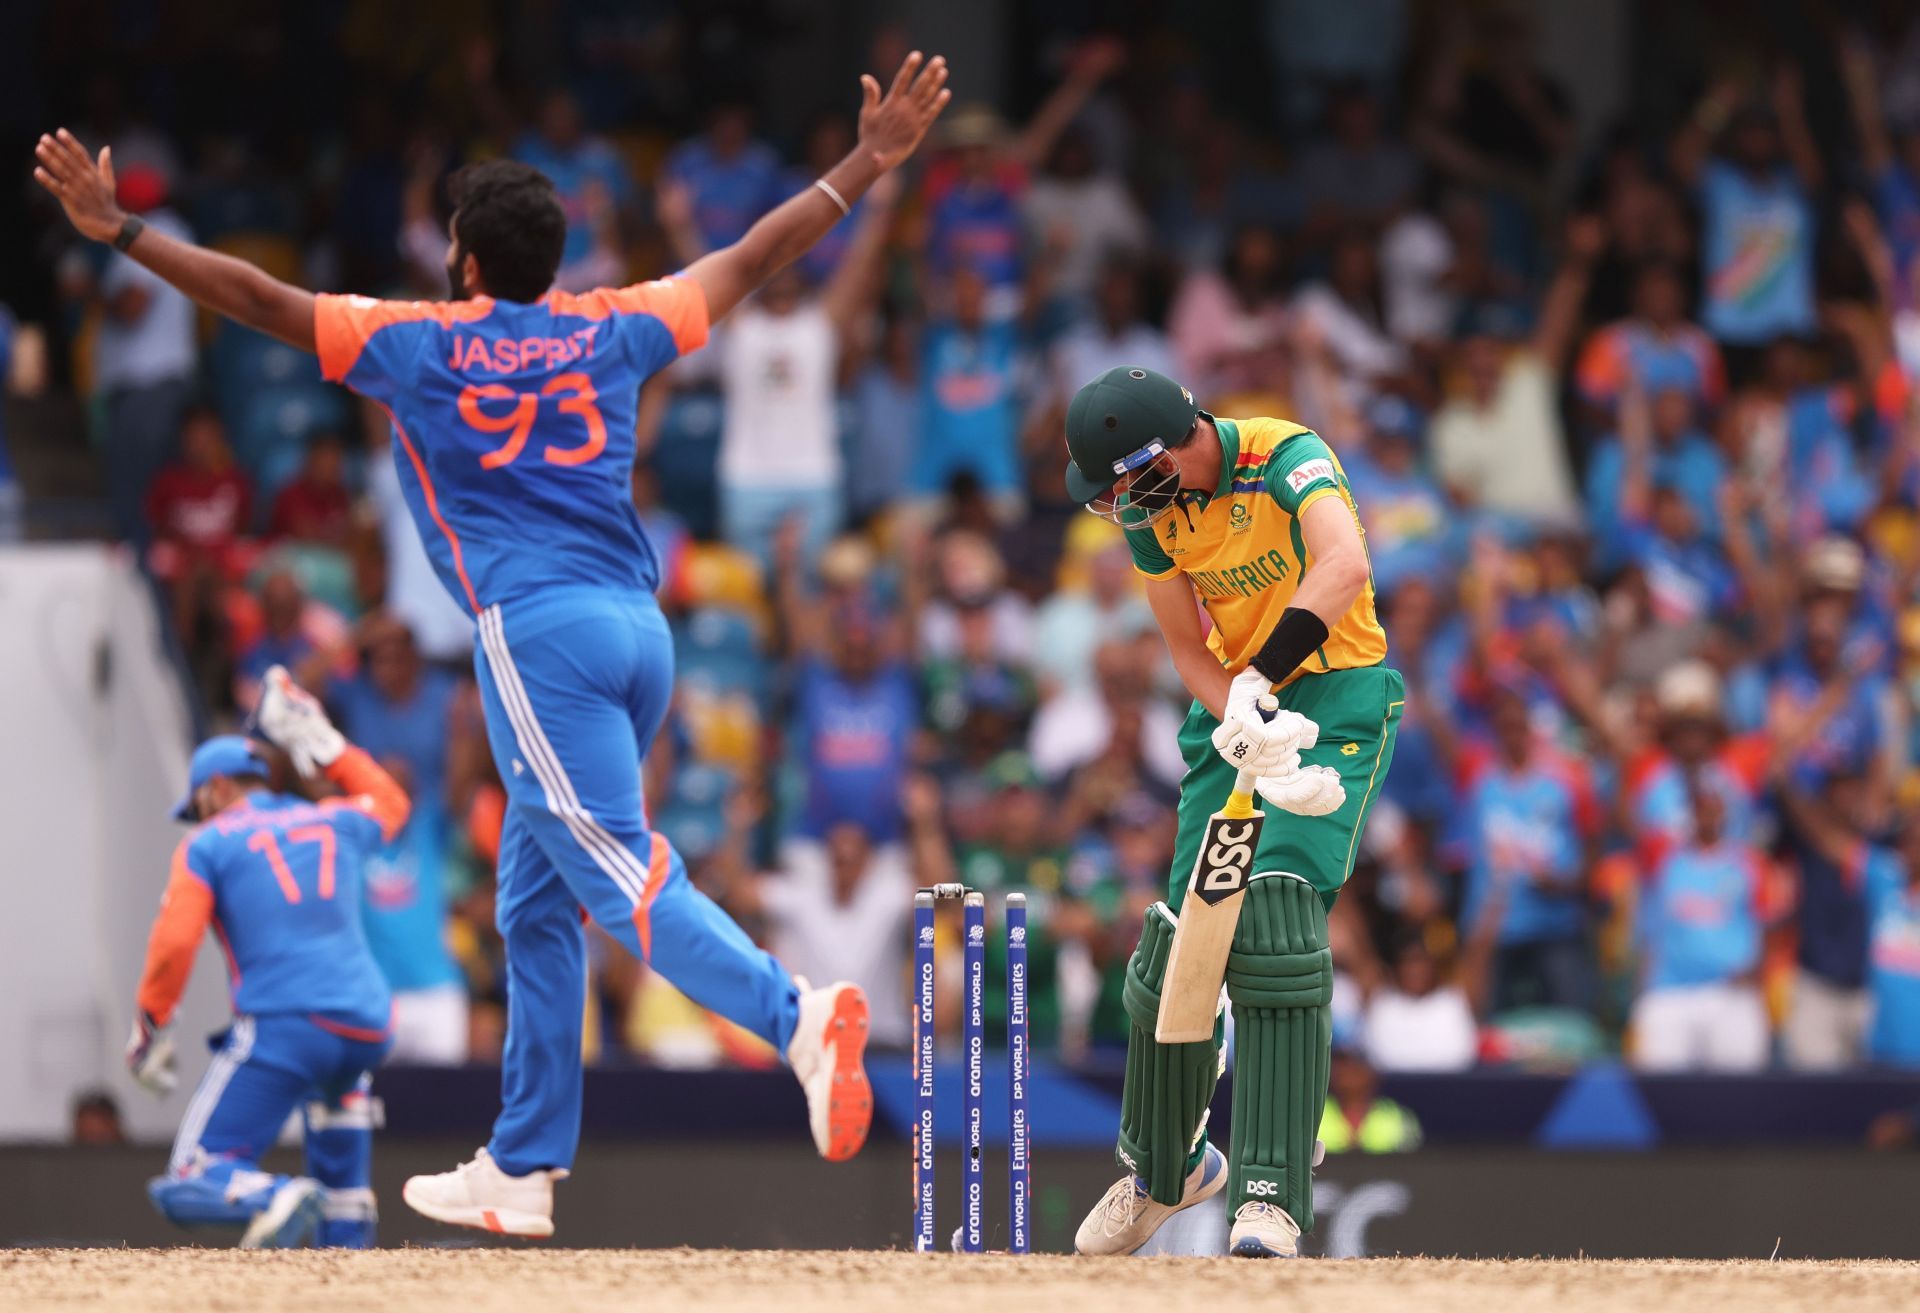 South Africa v India: Final - ICC Men&#039;s T20 Cricket World Cup West Indies &amp; USA 2024